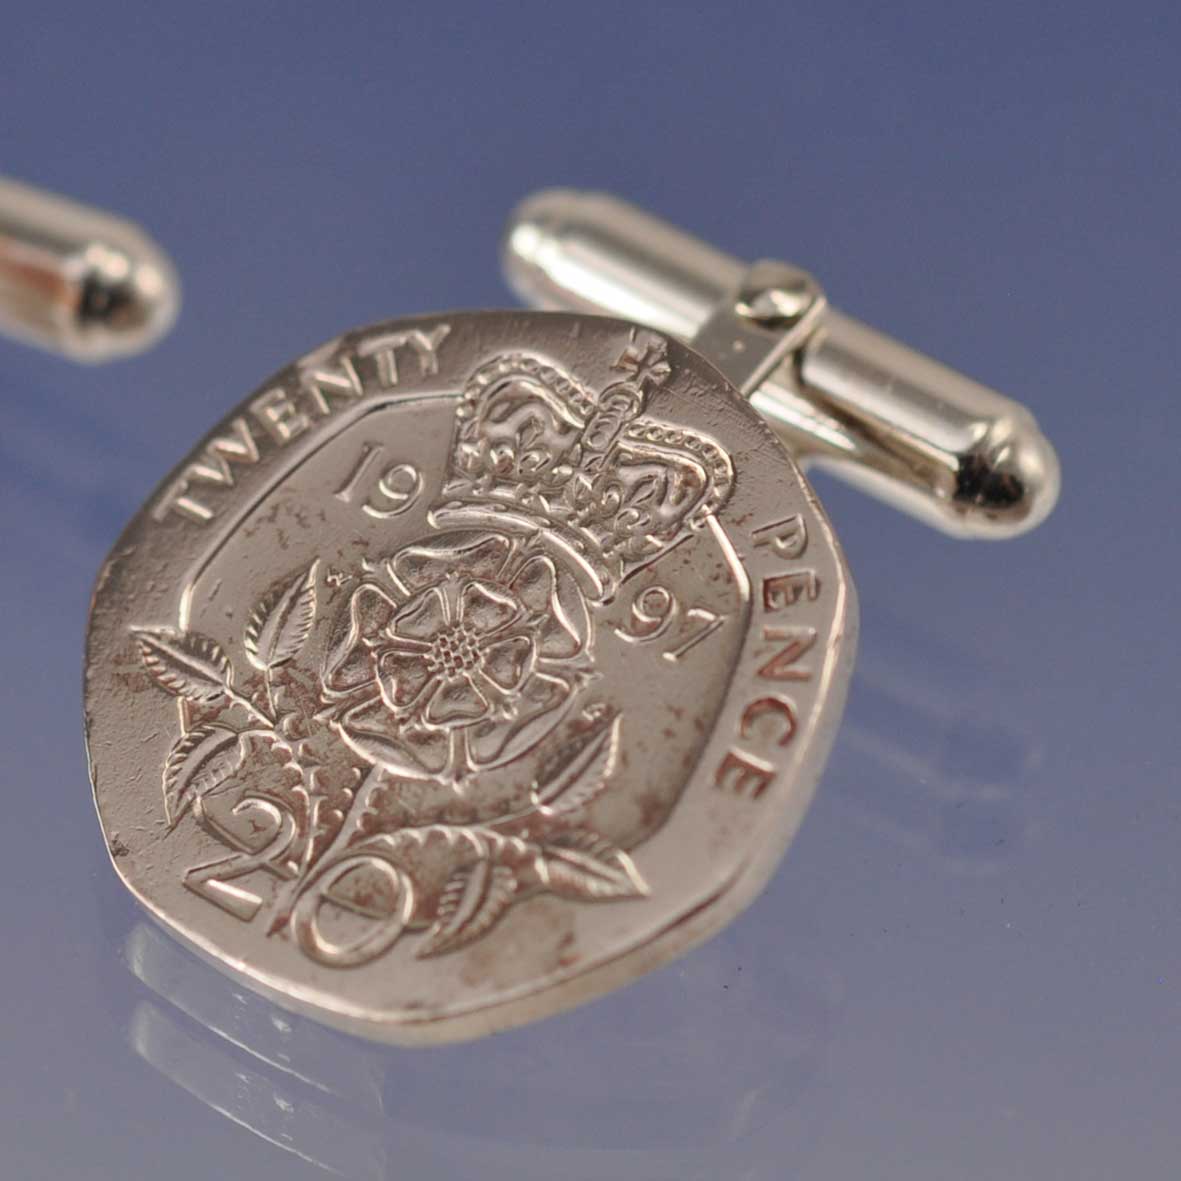 Your Coins Made into Cufflinks Cufflinks by Chris Parry Jewellery